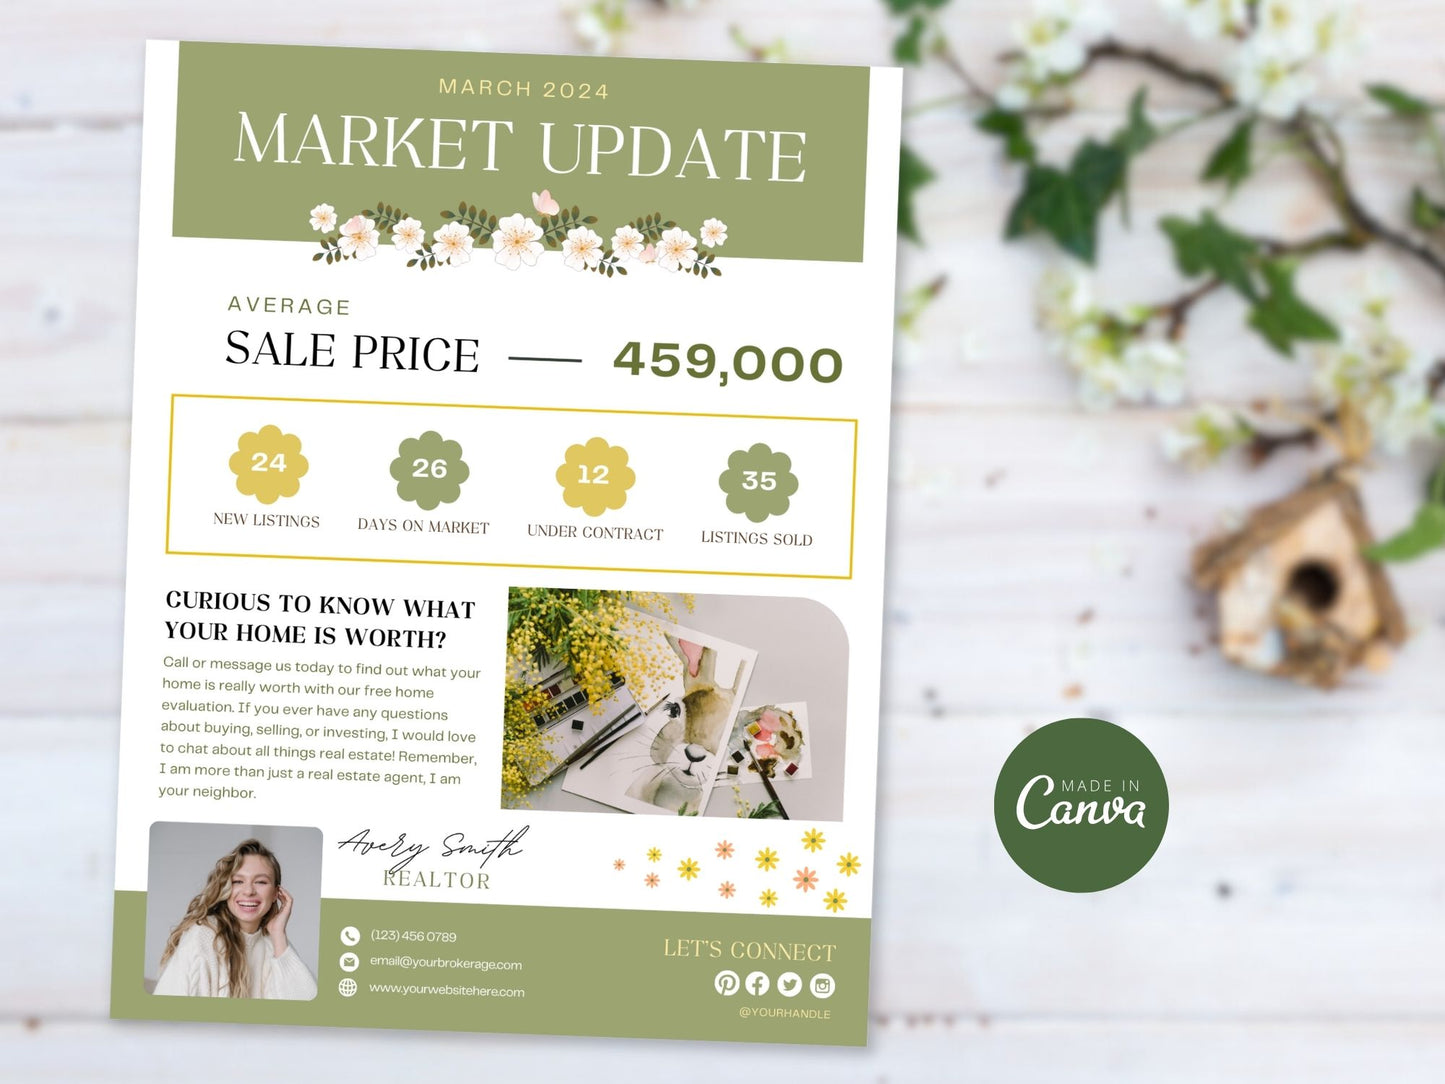 Spring Market Update Flyer - Professionally designed real estate flyer with essential market insights for the spring season.